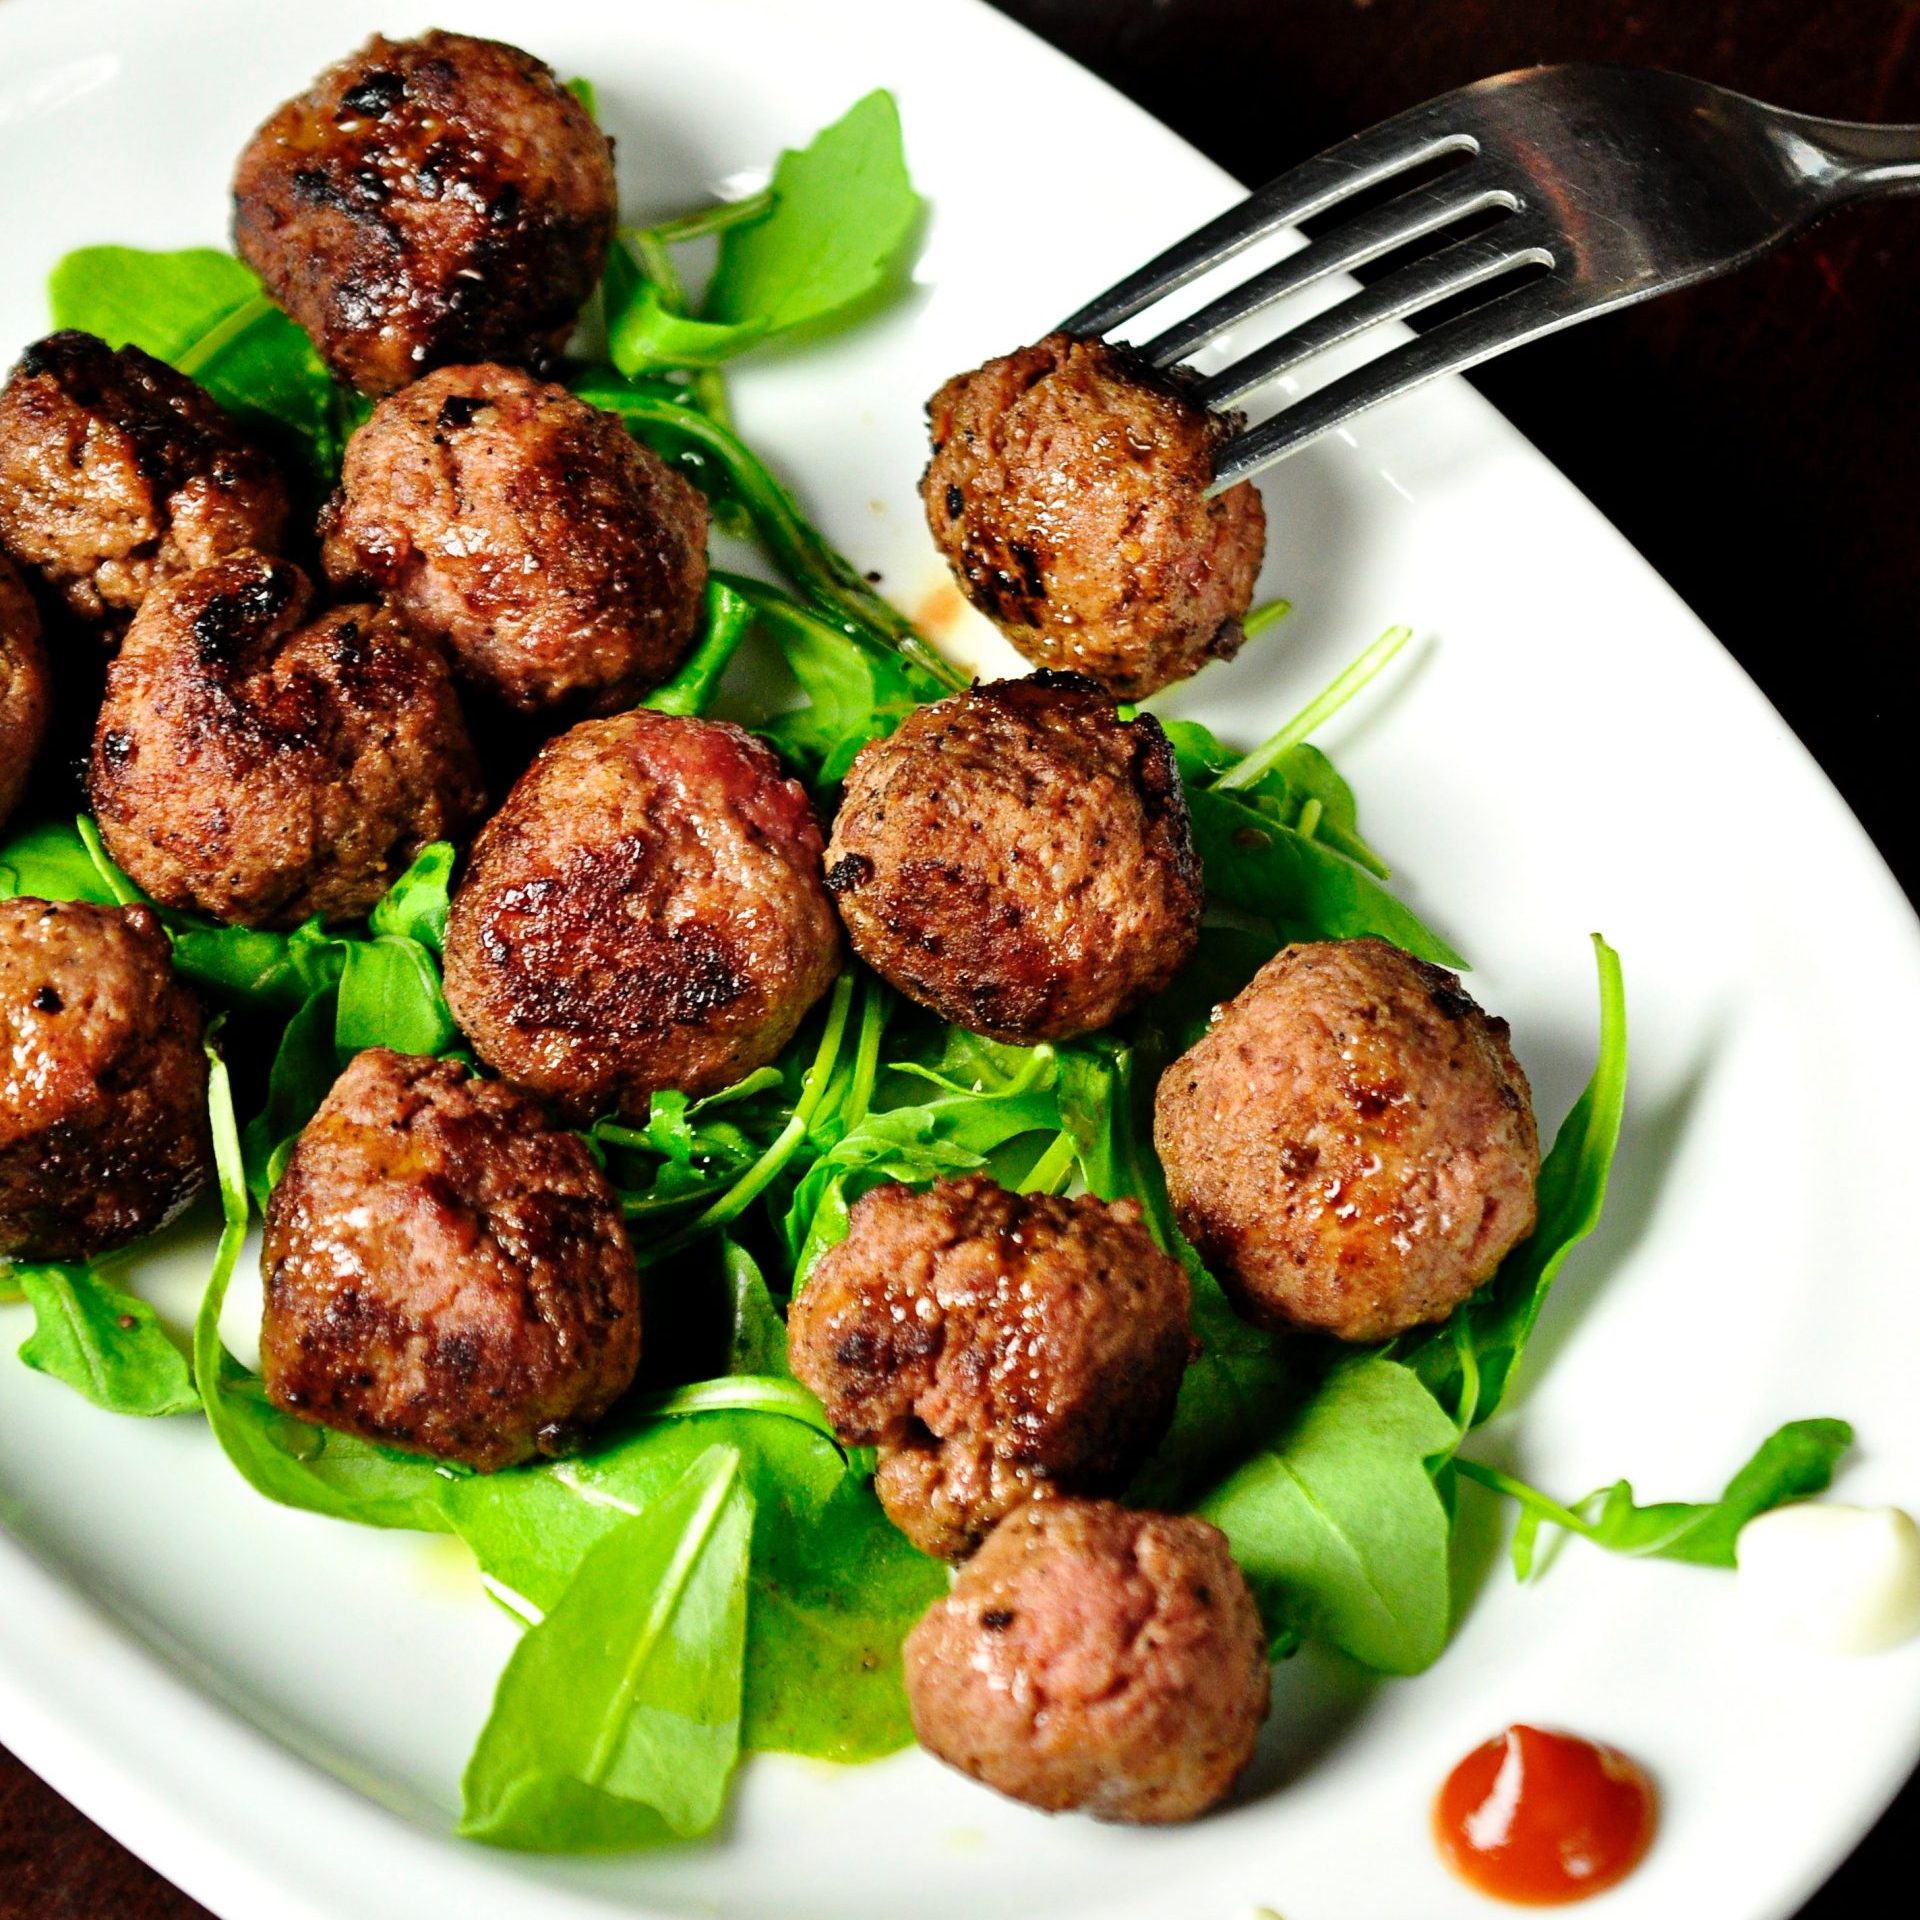 Meatballs with some salad leafs on a white board. Someone pulling a fork in one meatball